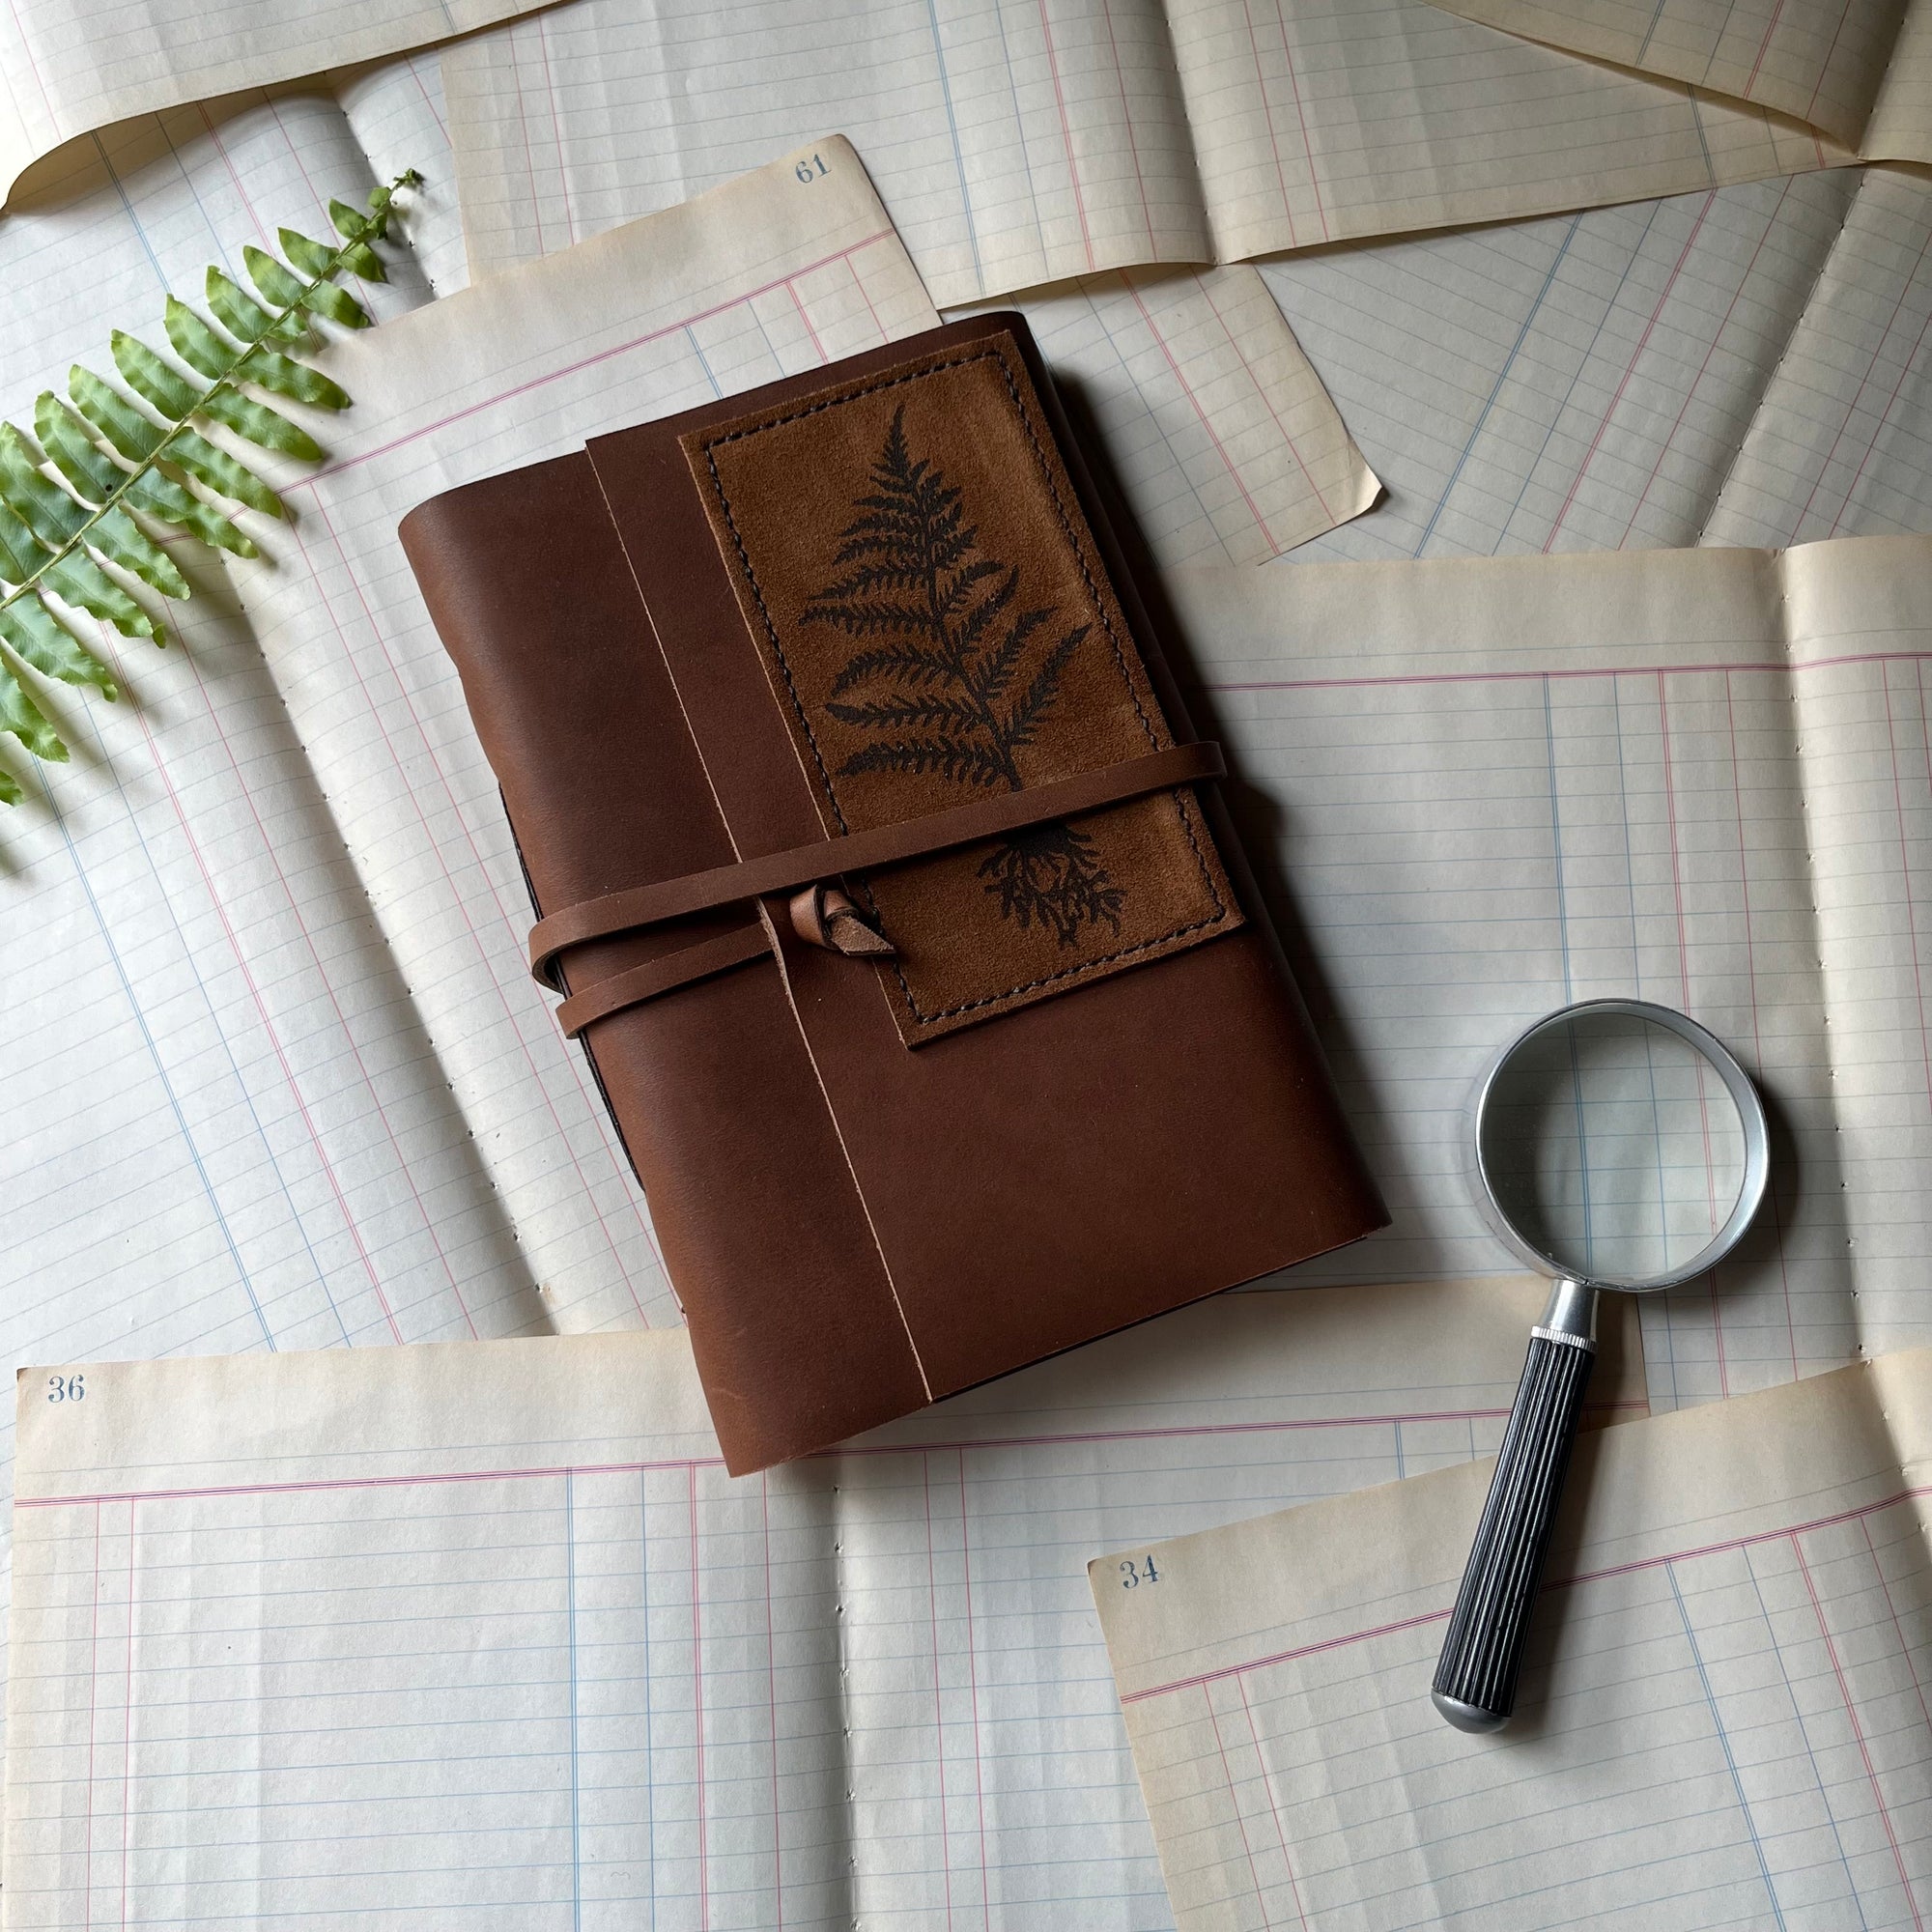 Handmade Leather Journal - guest book, blank journal, nature journal, book journal, gratitude journal - view of the front cover with a stamped fern on suede hand-stitched to the leather cover. A leather thong is attached for tying the journal when not in use.